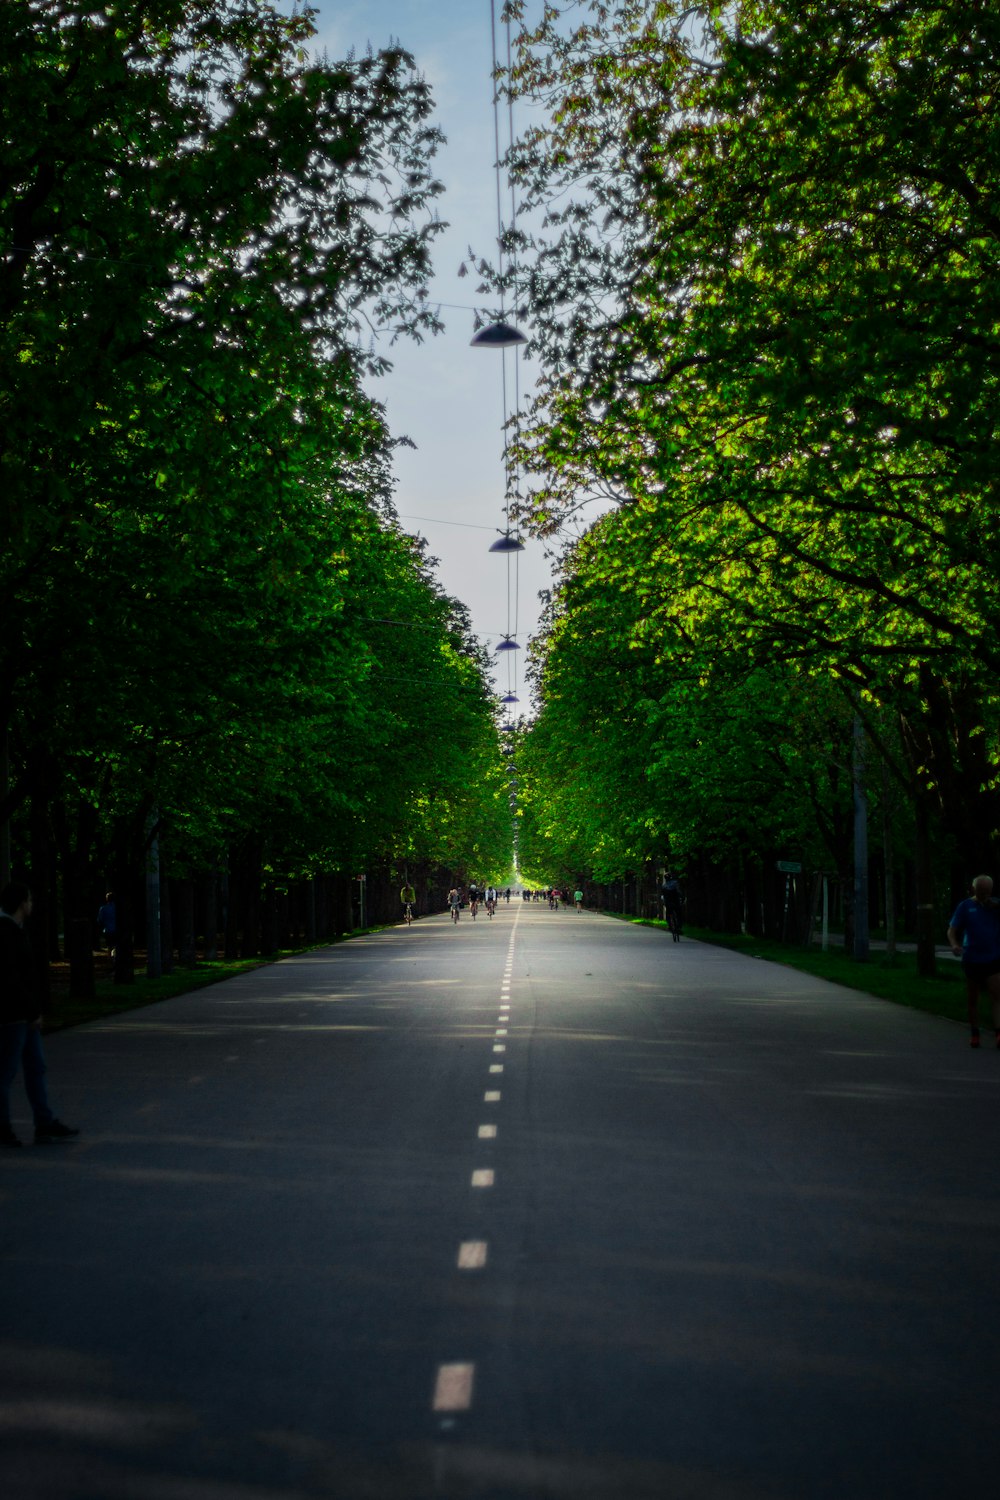 a street lined with trees and people walking down it